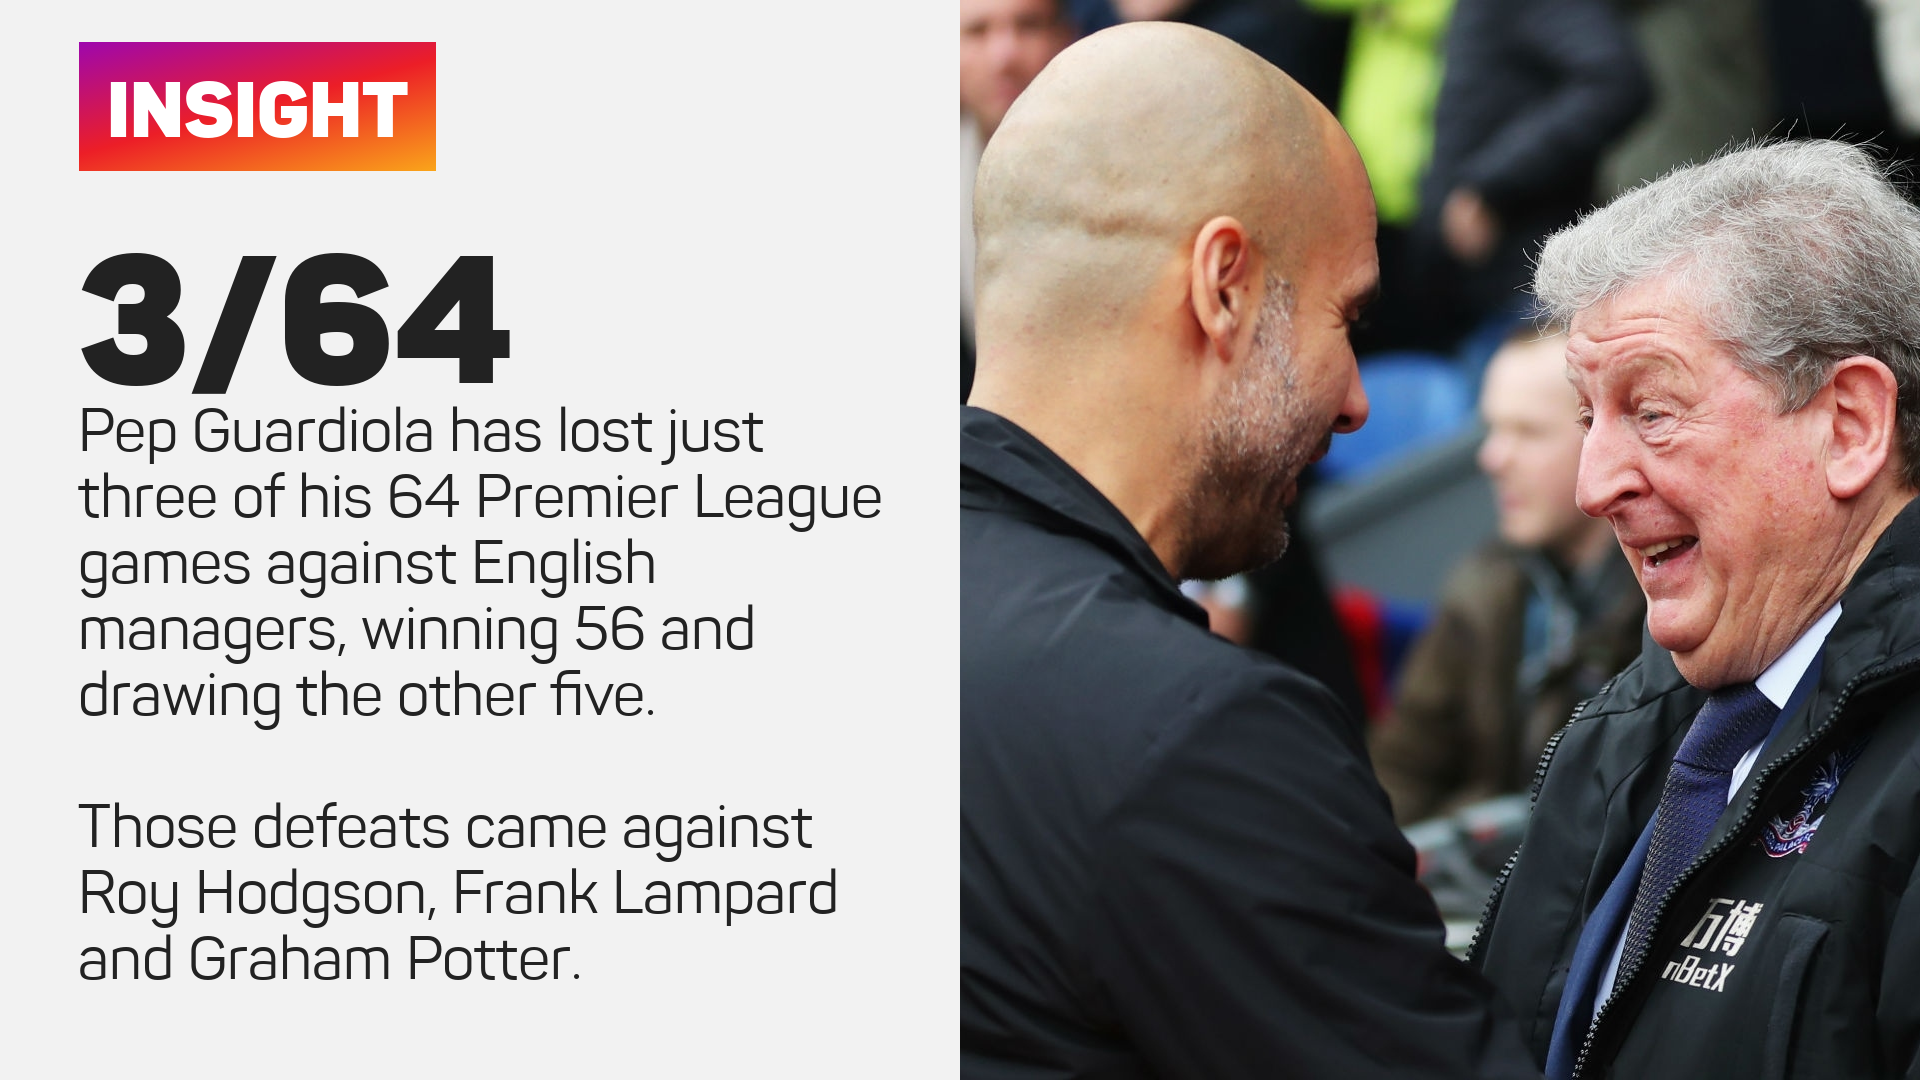 Pep Guardiola has a great record against English managers